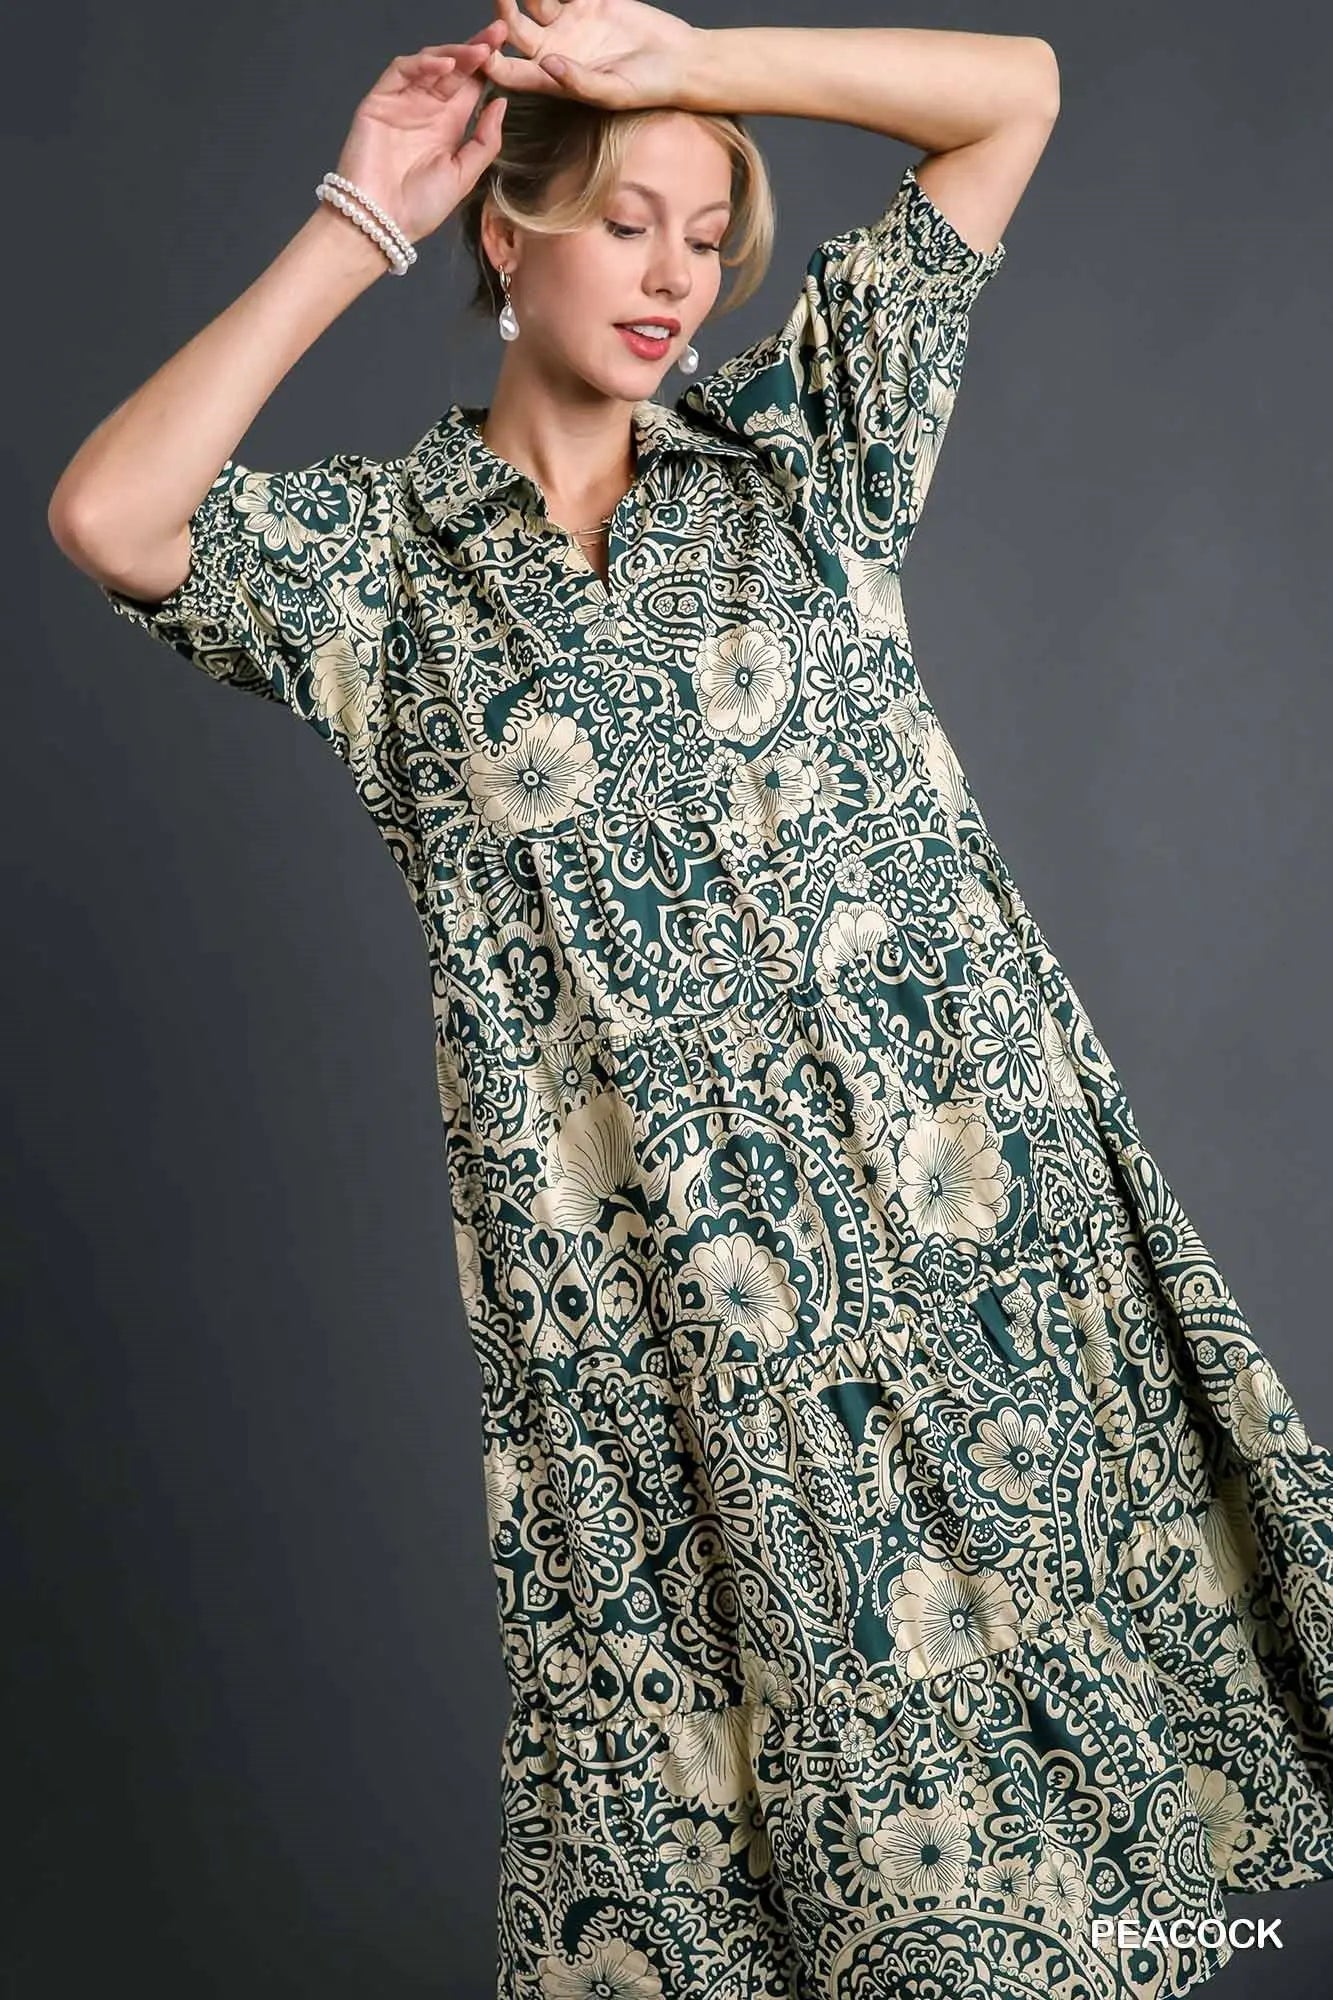 Paisley Print V-Neck Collared Tiered Dress with Puff Sleeves, & Smocked Cuffs